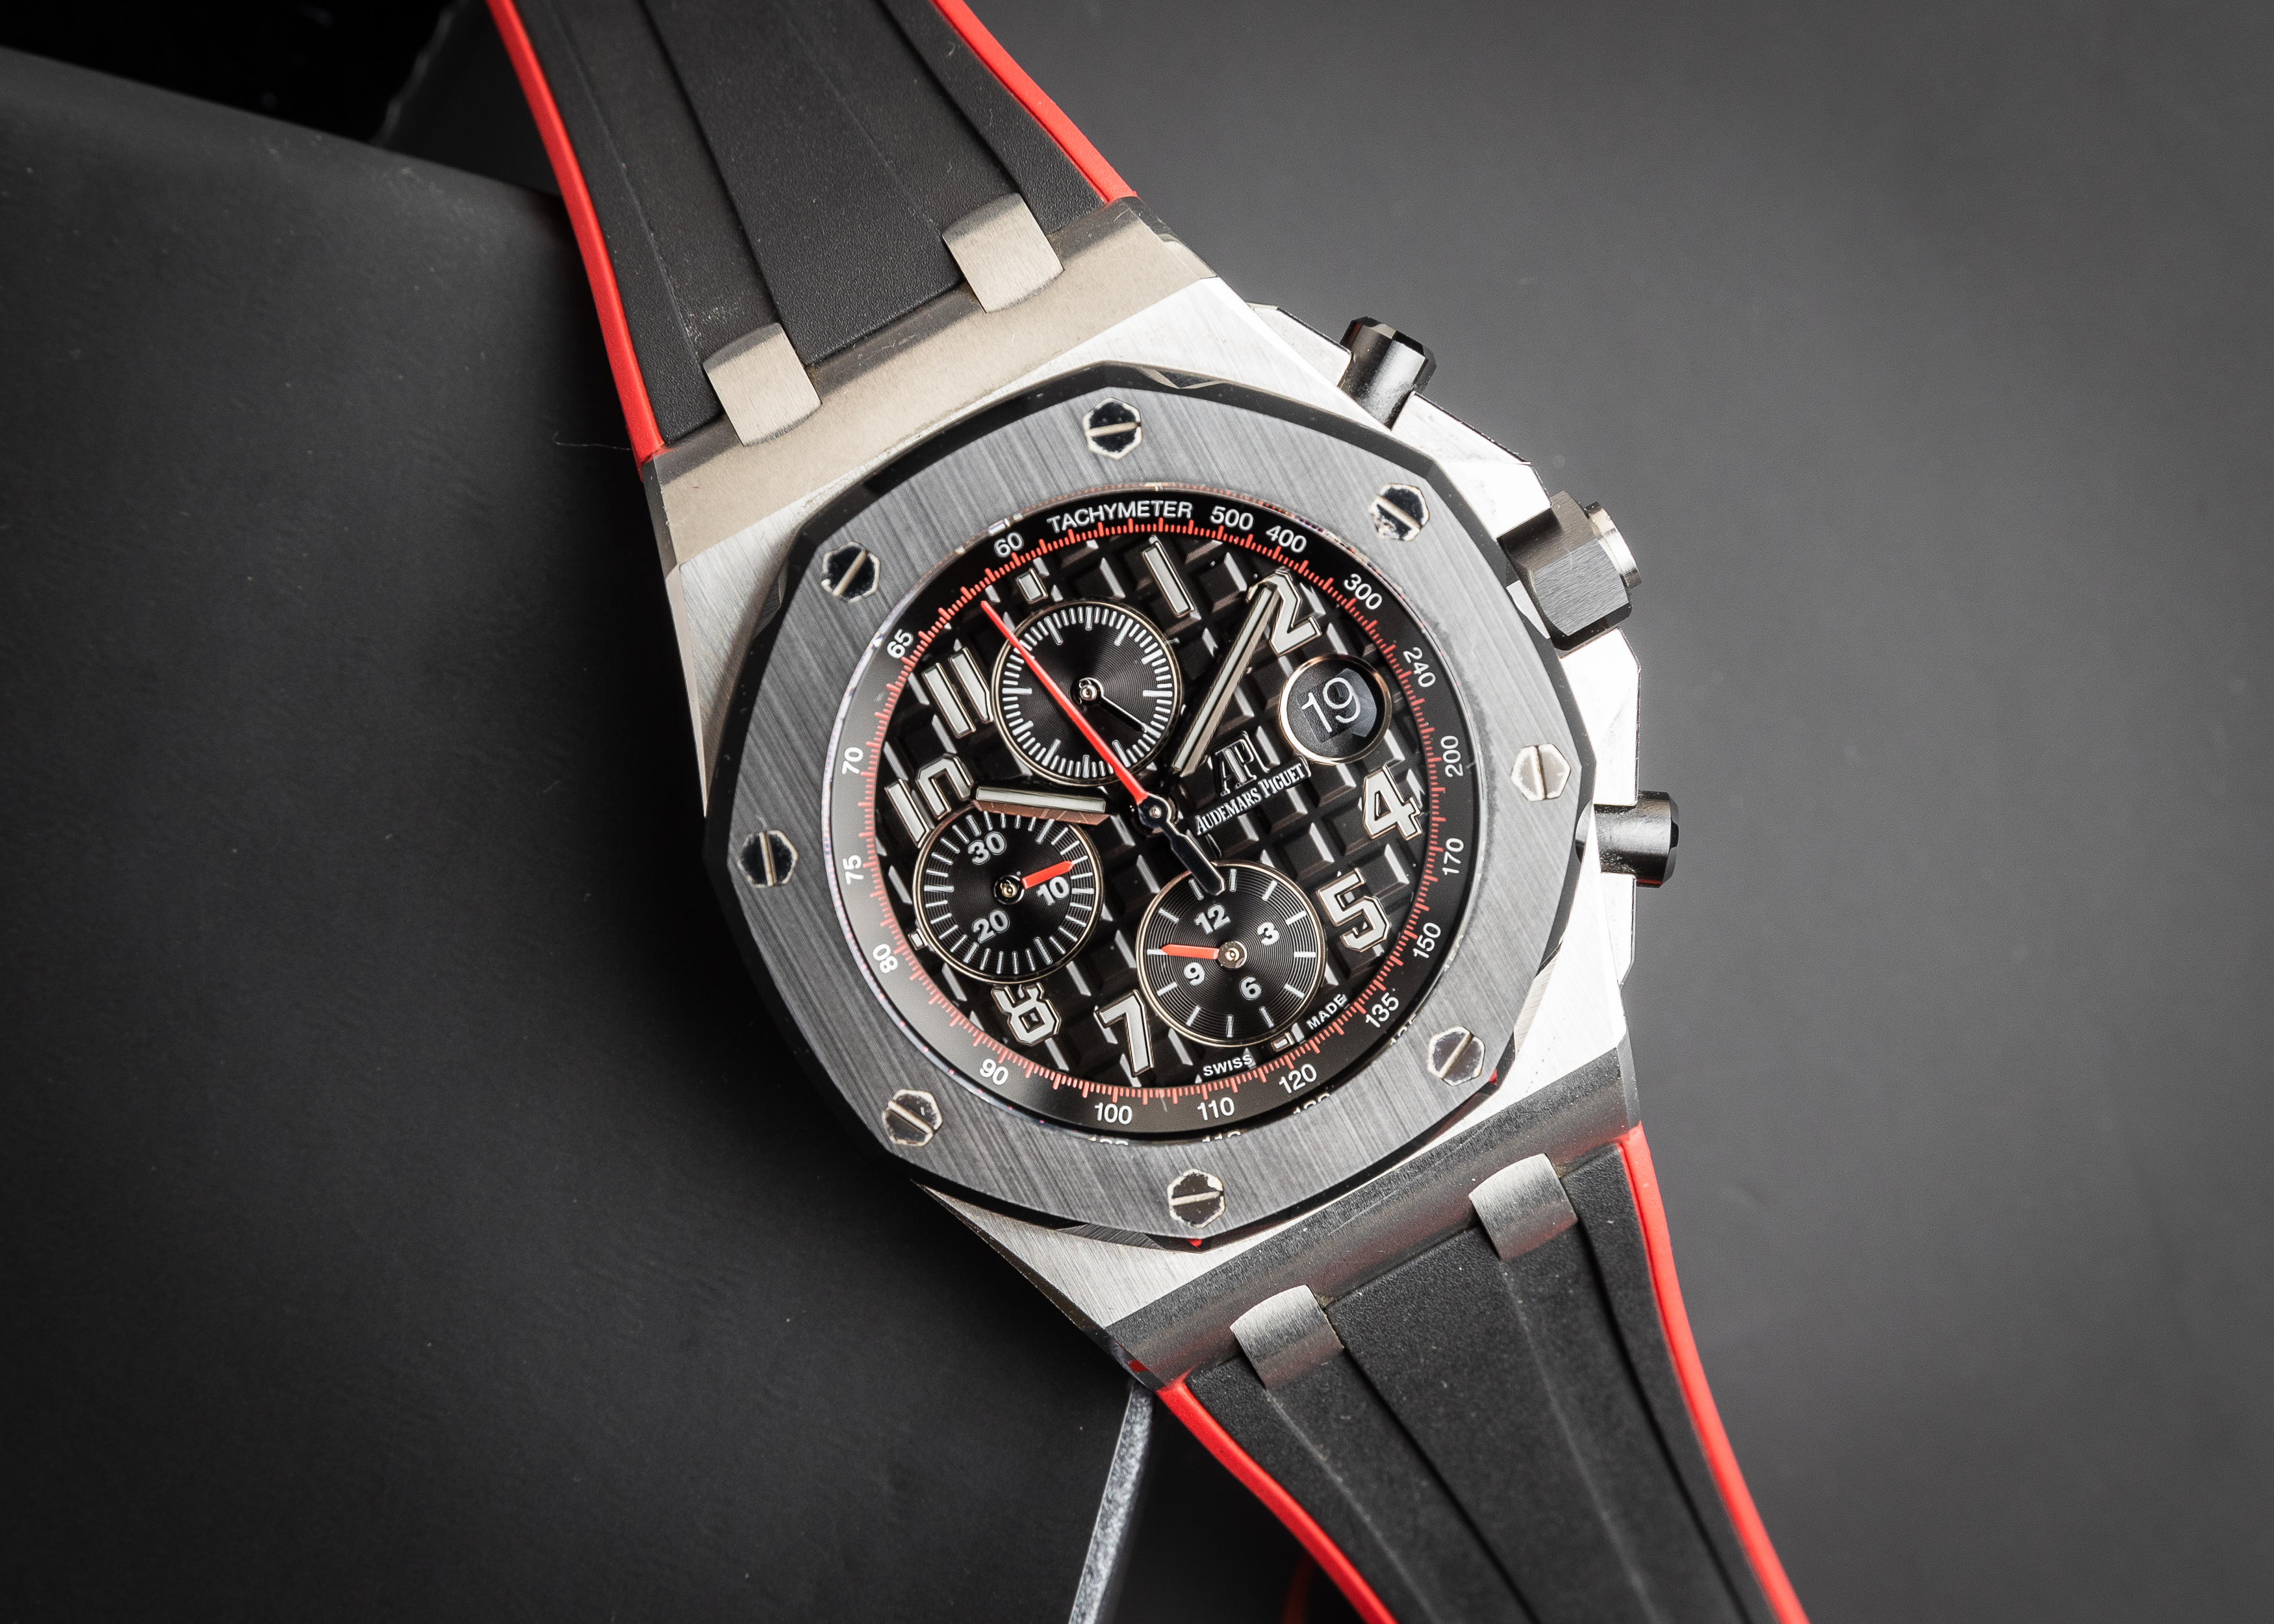 Audemars Piguet Royal Oak Offshore Chronograph 42mm AP Vampire... for  $24,750 for sale from a Trusted Seller on Chrono24